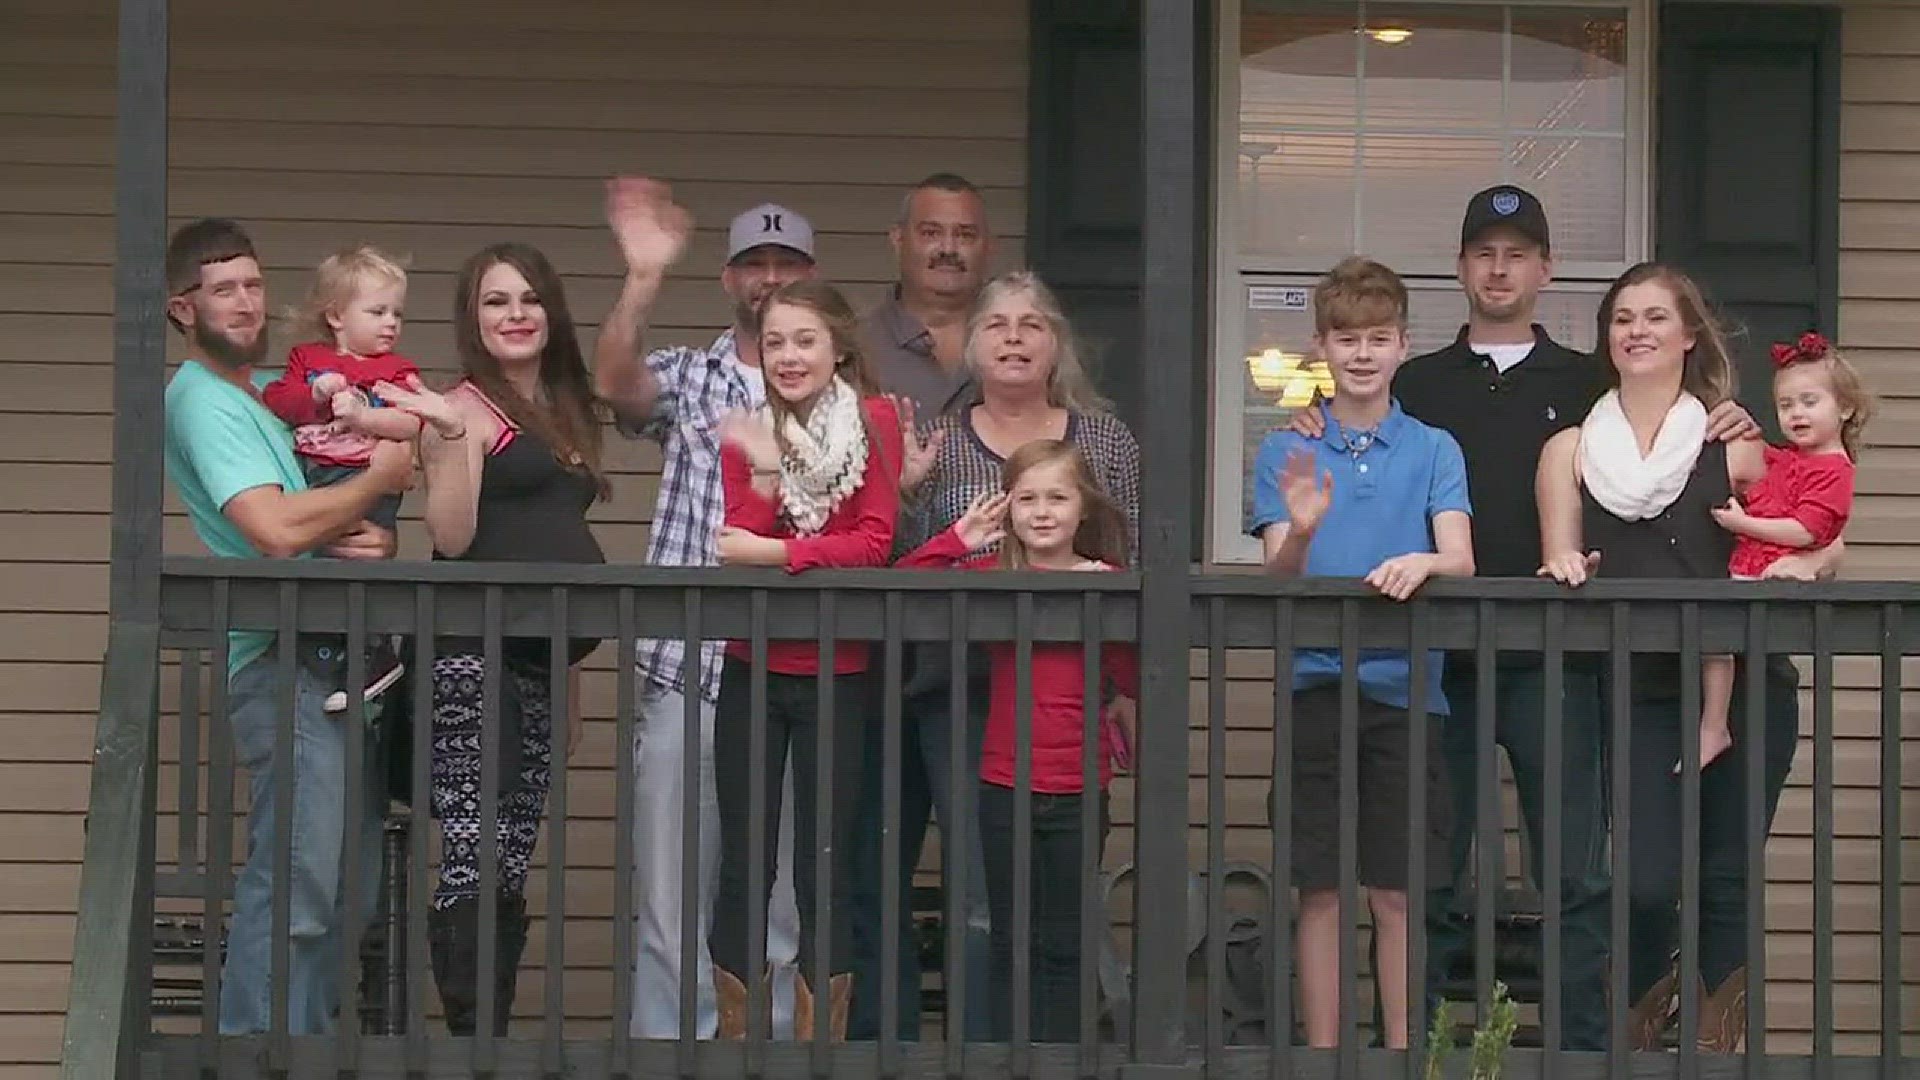 The Jenkins family lost their home to historic flooding not once, but twice. Now, they're back home just in time for Christmas.